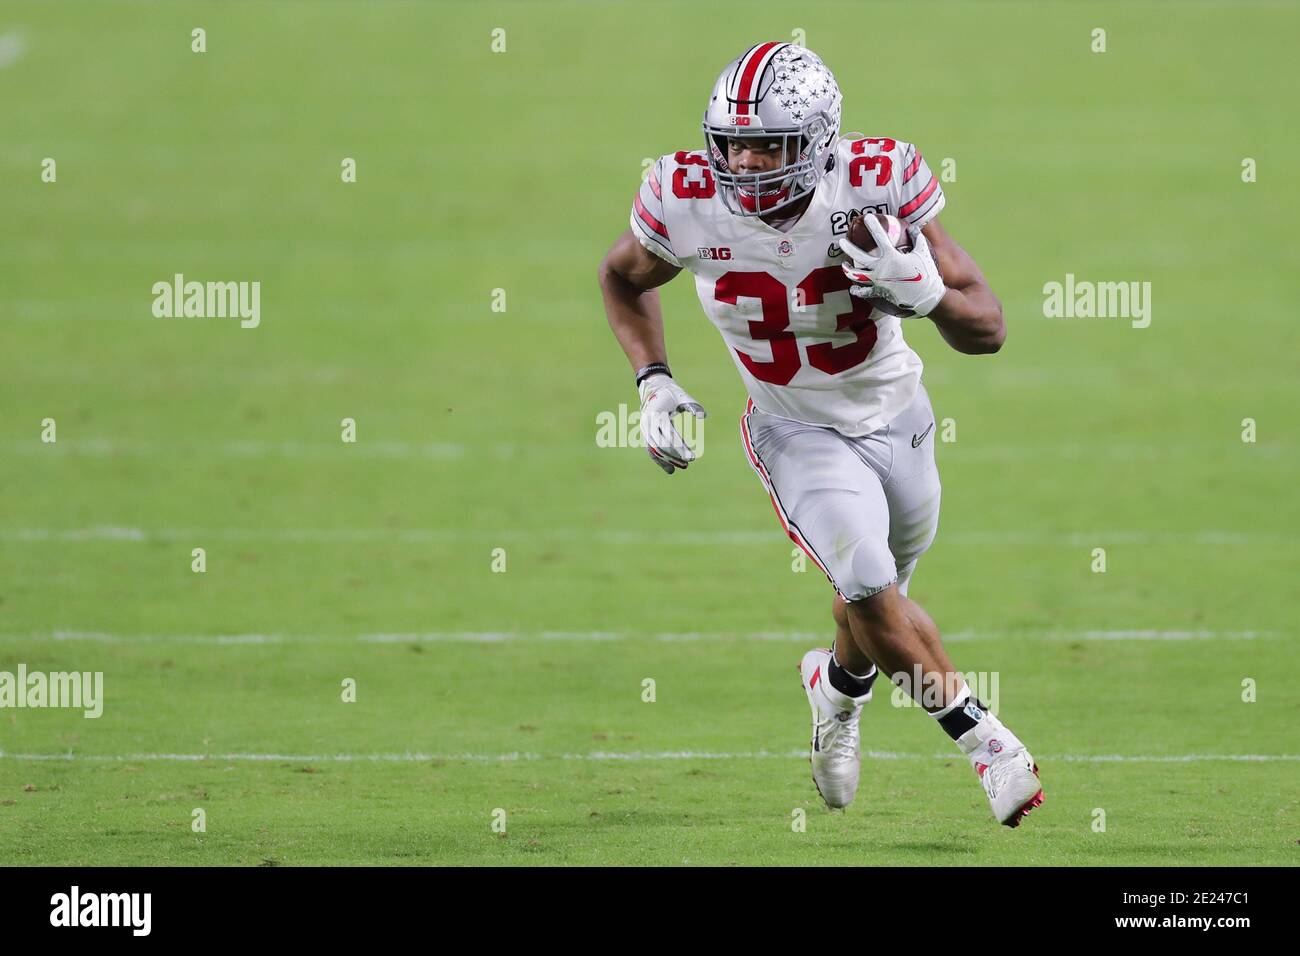 January 11, 2021: Ohio State Buckeyes running back MASTER TEAGUE III (33) runs the ball during the College Football Playoff National Championship at Hard Rock Stadium in Miami Gardens, Florida. Credit: Cory Knowlton/ZUMA Wire/Alamy Live News Stock Photo